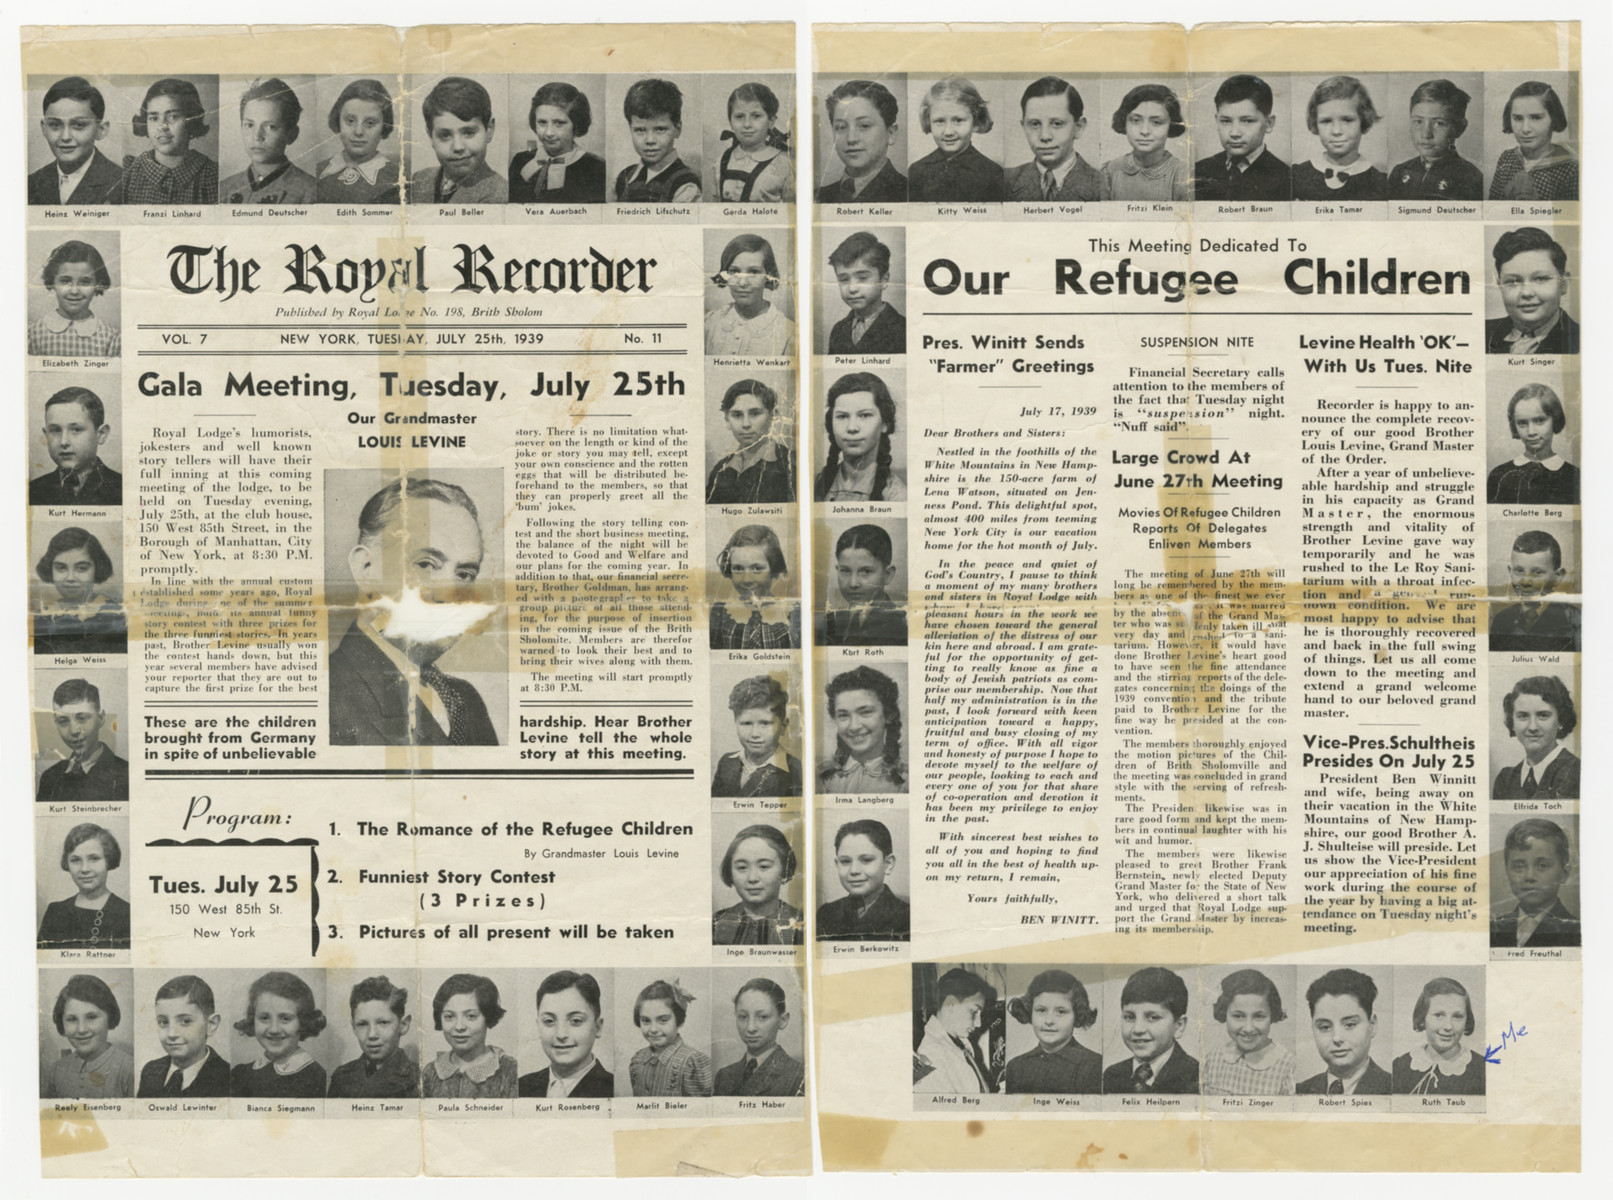 Brith Shalom newsletter showing the photographs of all fifty children brought to the United States by Gilbert and Eleanor Kraus.